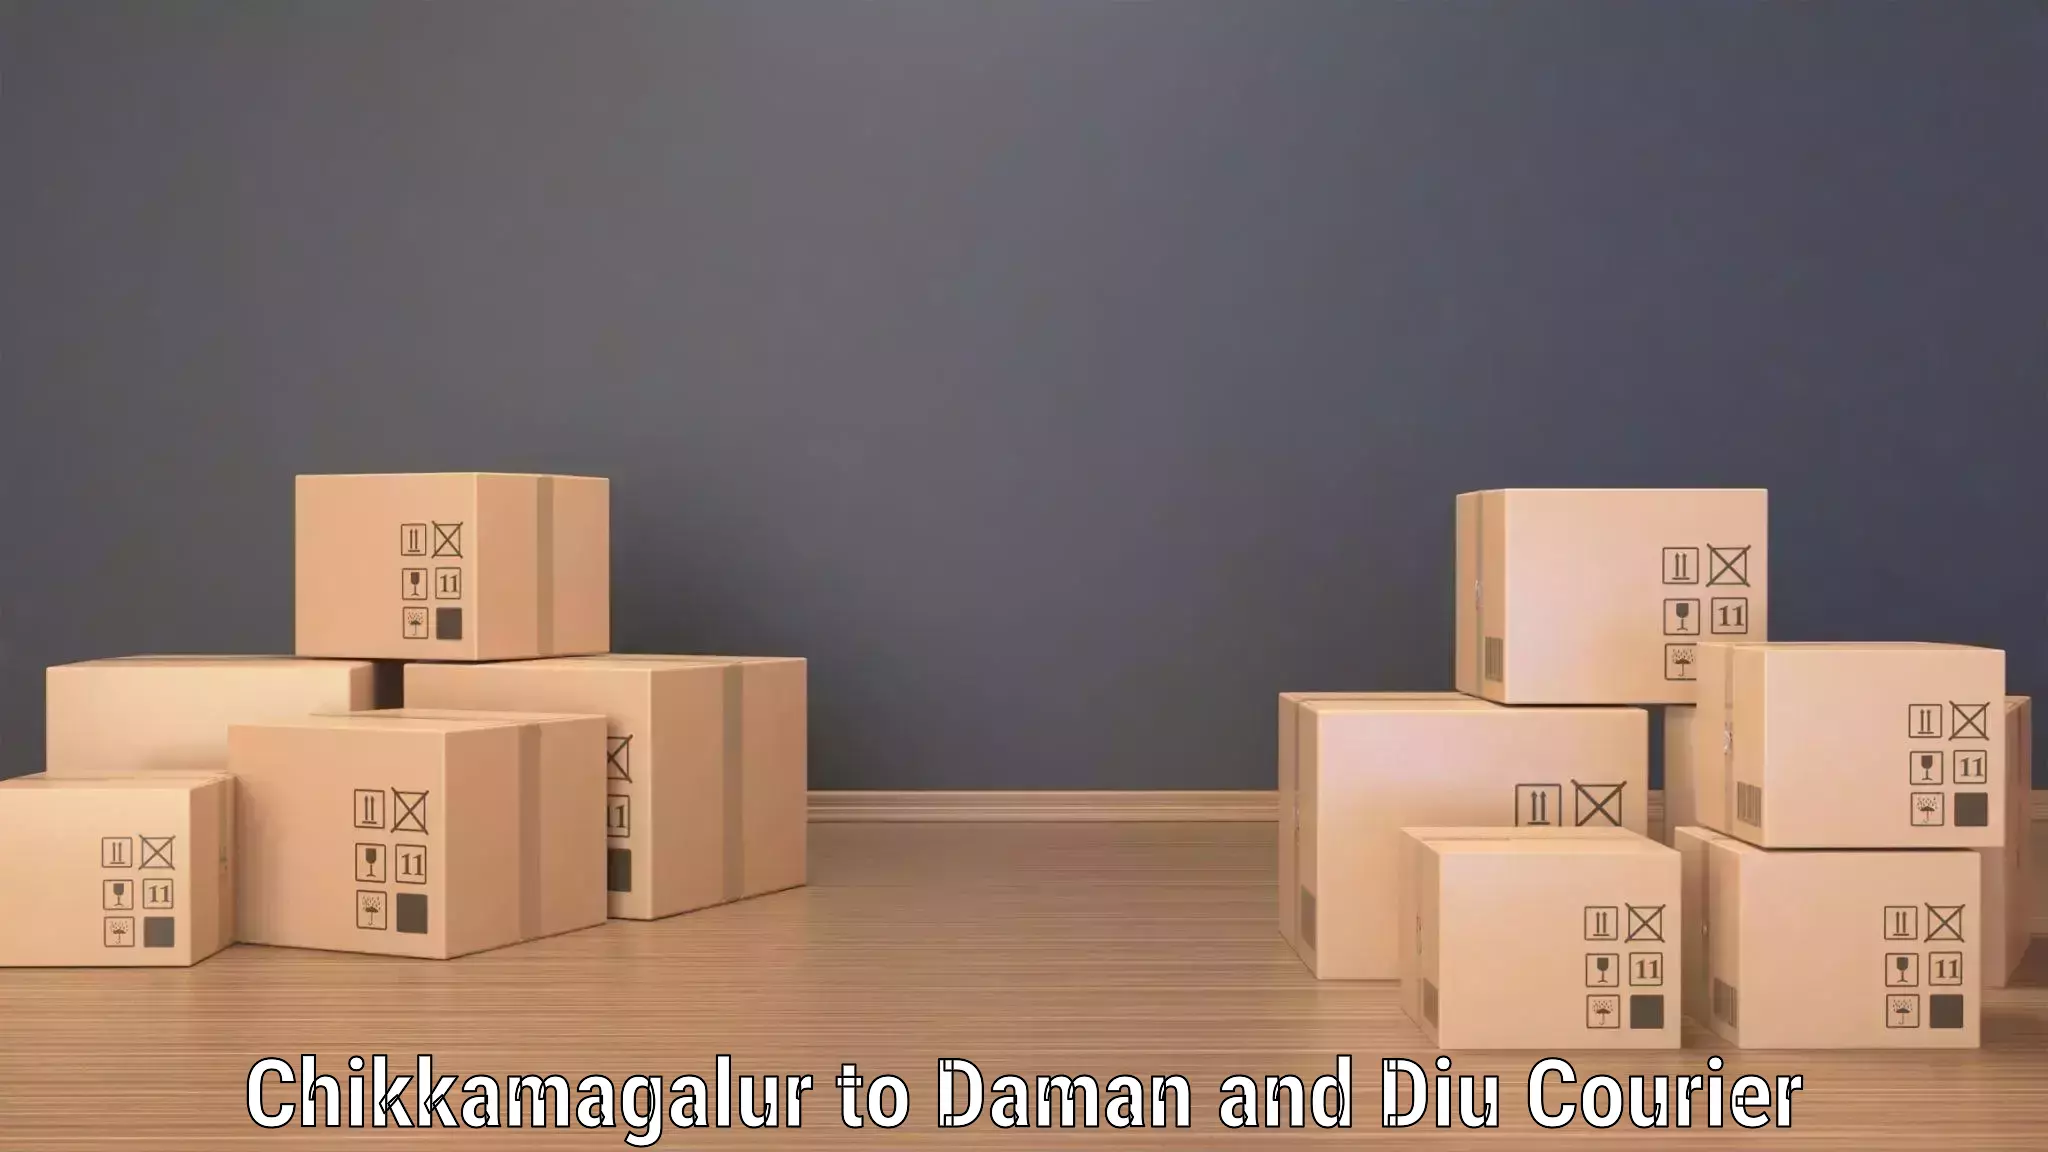 State-of-the-art courier technology Chikkamagalur to Daman and Diu